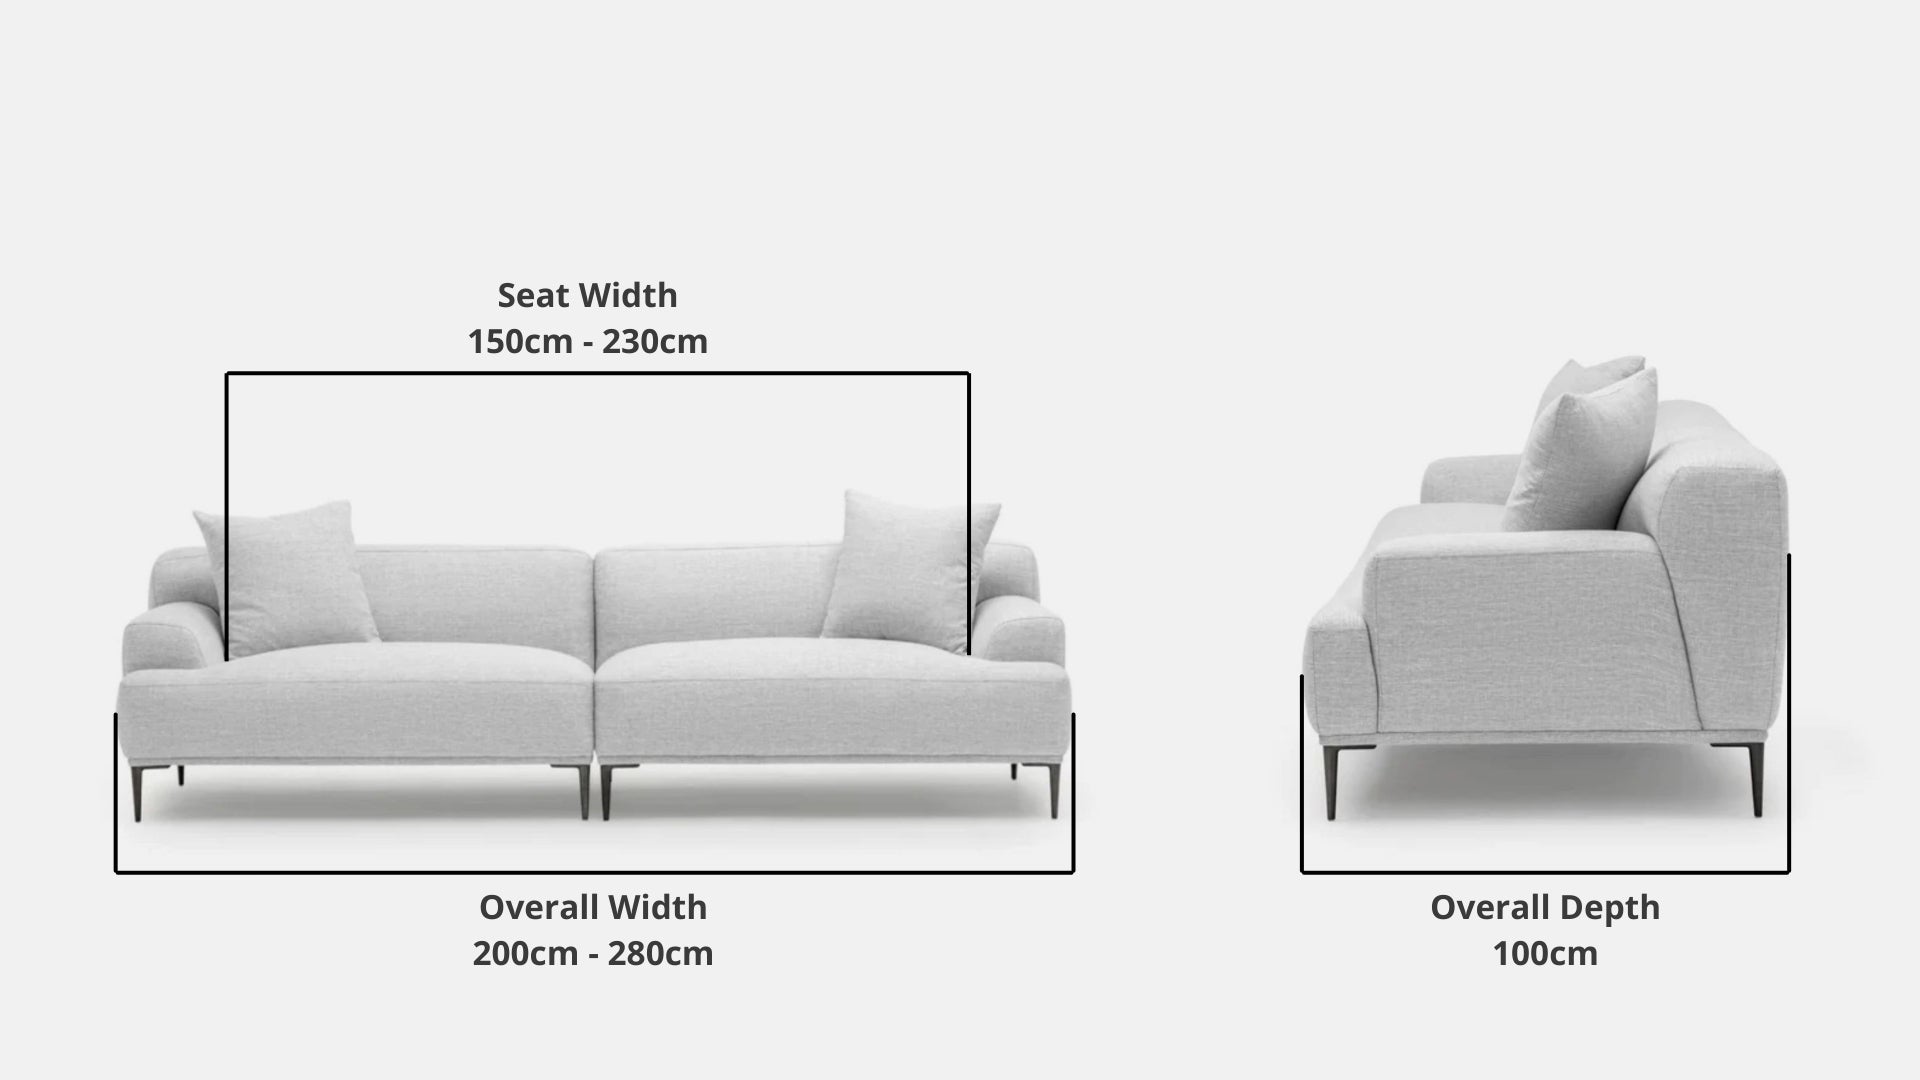 Details the key dimensions in terms of overall width, overall depth and seat width for Crystal Fabric Sofa